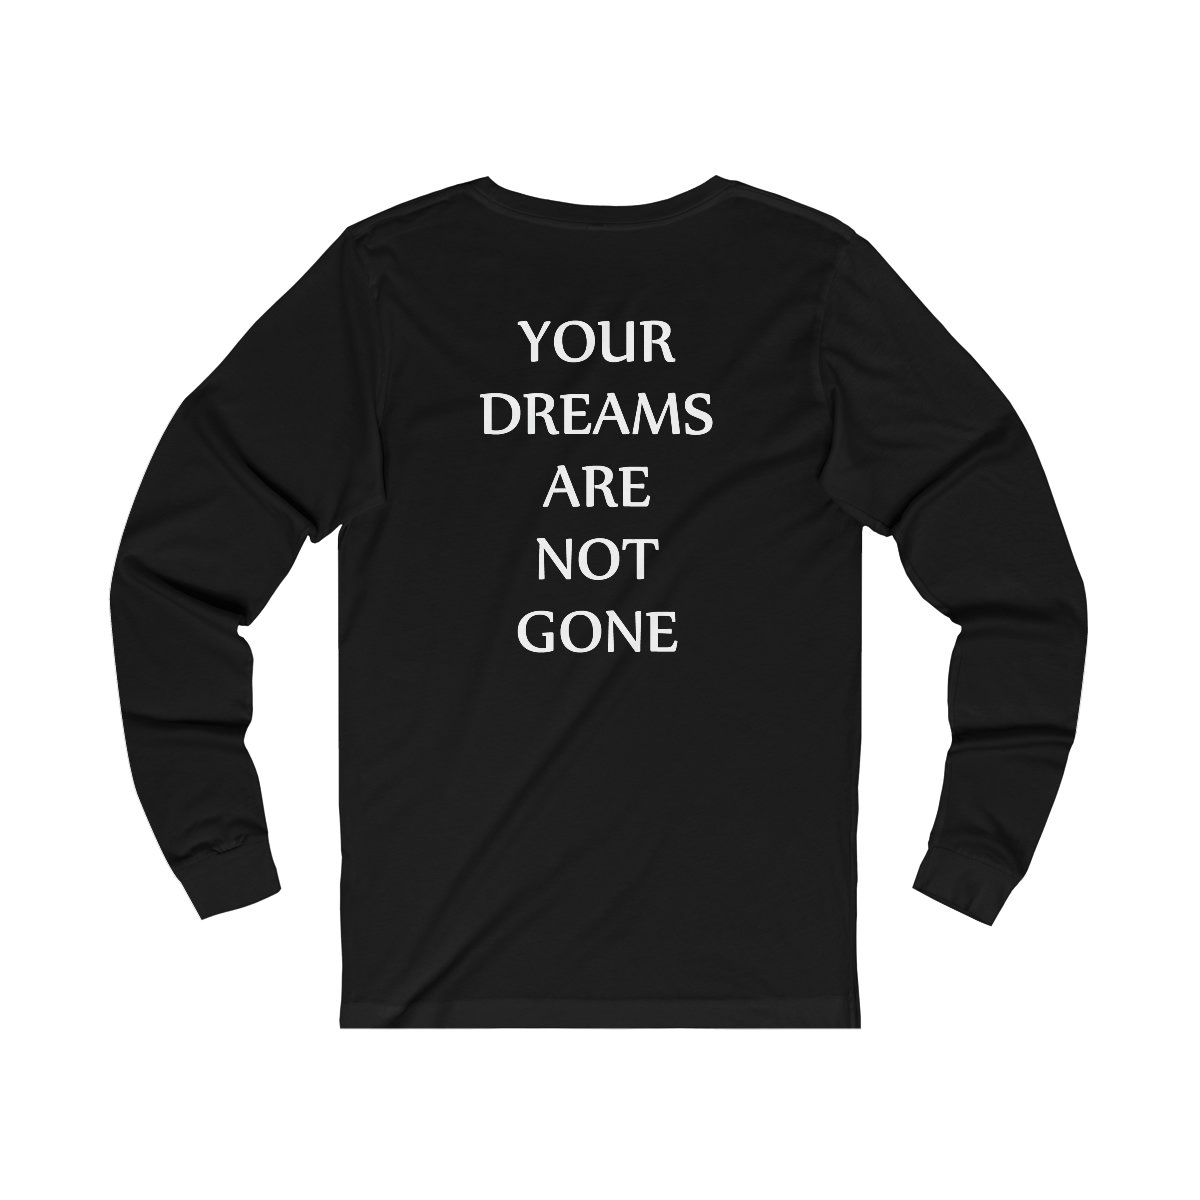 Divine Martyr – More Than What You Are (Version 2) Long Sleeve Tshirt (2-Sided)